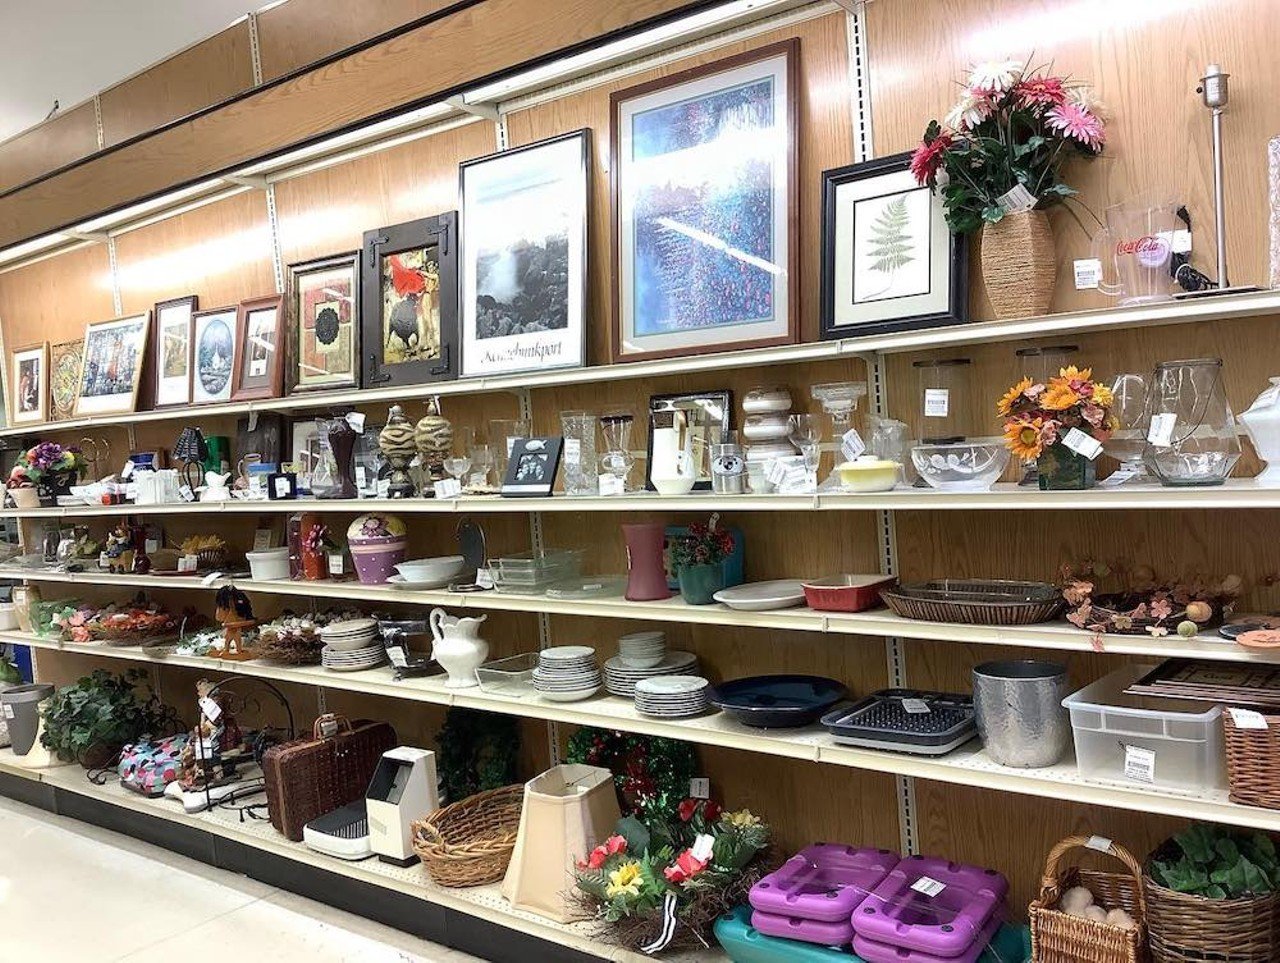 Find Bargains and Hidden Gems at Valley Thrift
Cost varies
Turn your date into the ultimate treasure hunt as you search for great finds at Valley Thrift and connect over your love of vintage clothes and good deals, or have a friendly competition to see who can find the coolest item under $15. If you’re more into antiquing, you can check out Riverside Centre Antique Mall in the East End or Ohio Antique Mall in Fairfield. Over-the-Rhine and Northside are home to a slew of vintage shops, as well. Valley Thrift: 9840 Reading Road, Evendale & 4301 Dixie Highway, Fairfield.